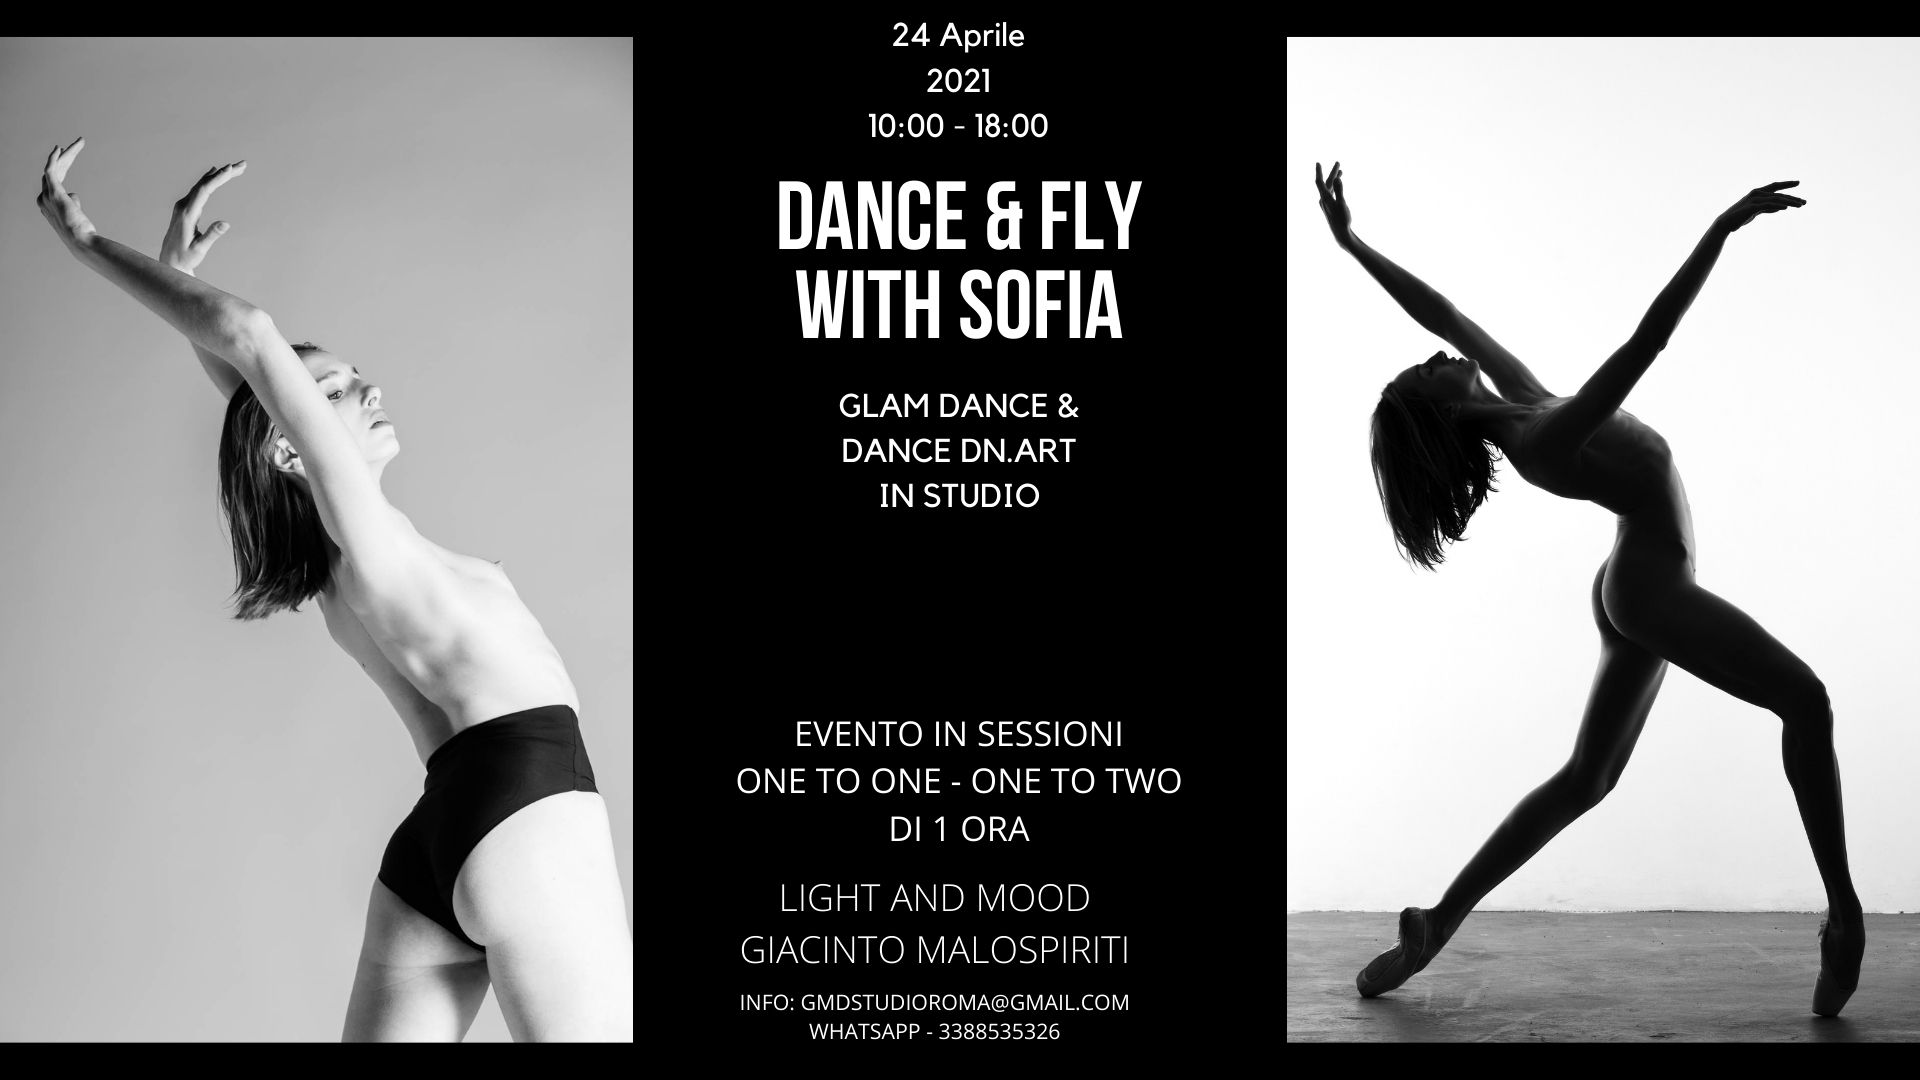 Dance & Fly with Sofia